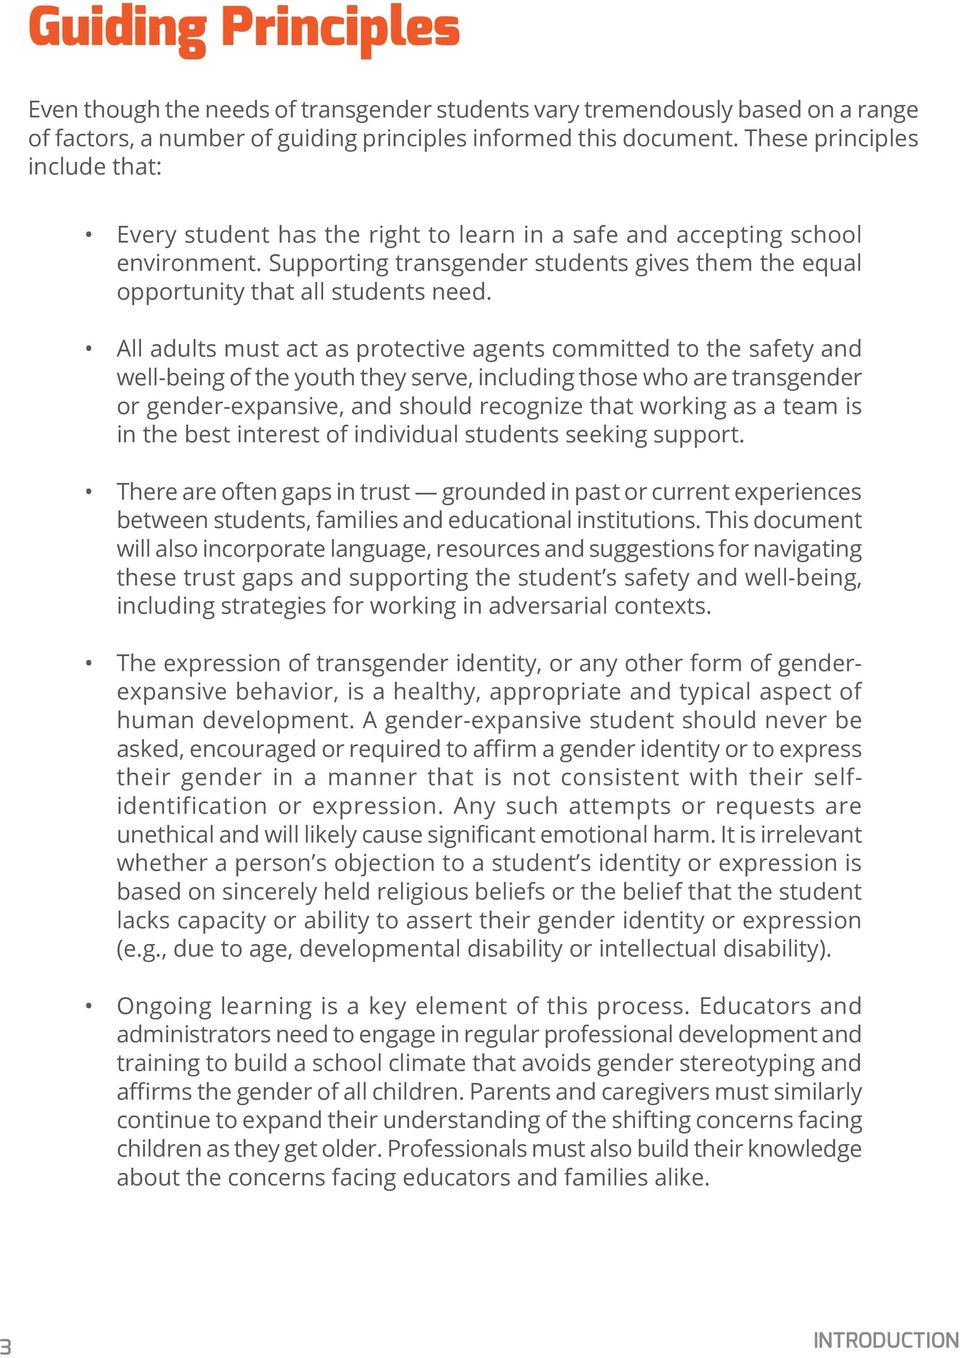 All adults must act as protective agents committed to the safety and well-being of the youth they serve, including those who are transgender or gender-expansive, and should recognize that working as